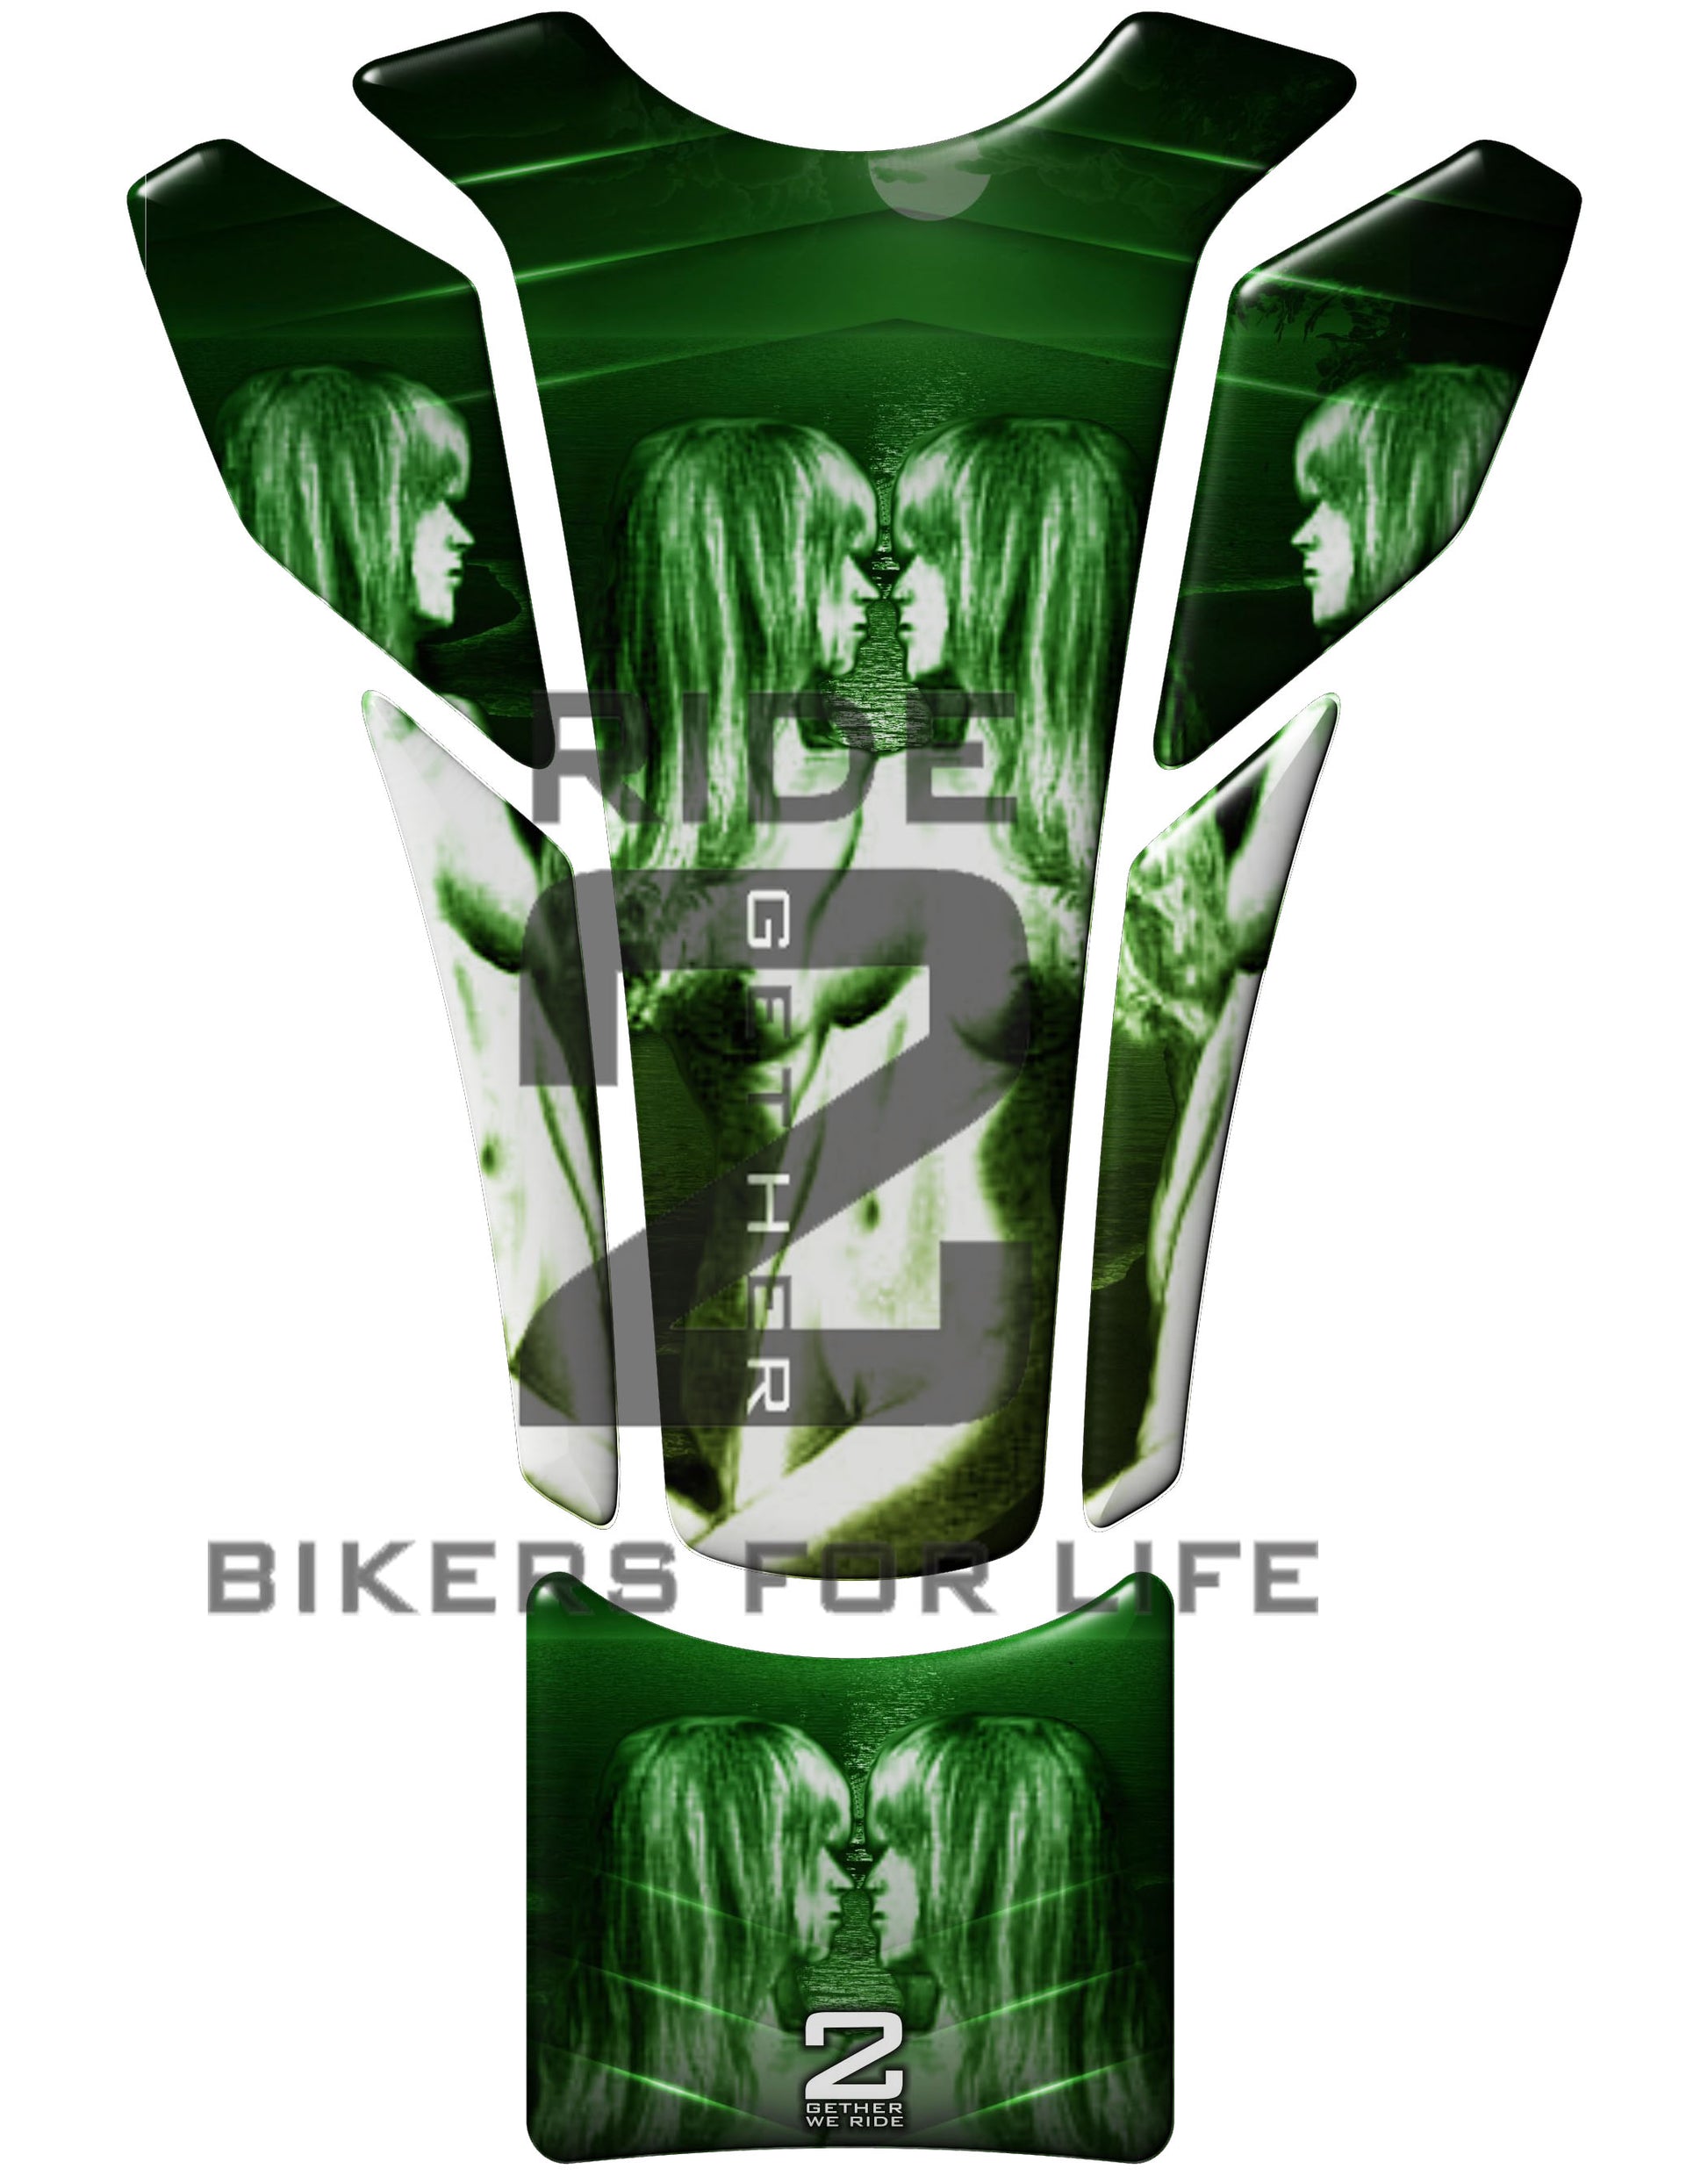 Universal Fit Green Kissing Twins Motor Bike Tank Pad protector. A Street Pad which fits most motorcycles.